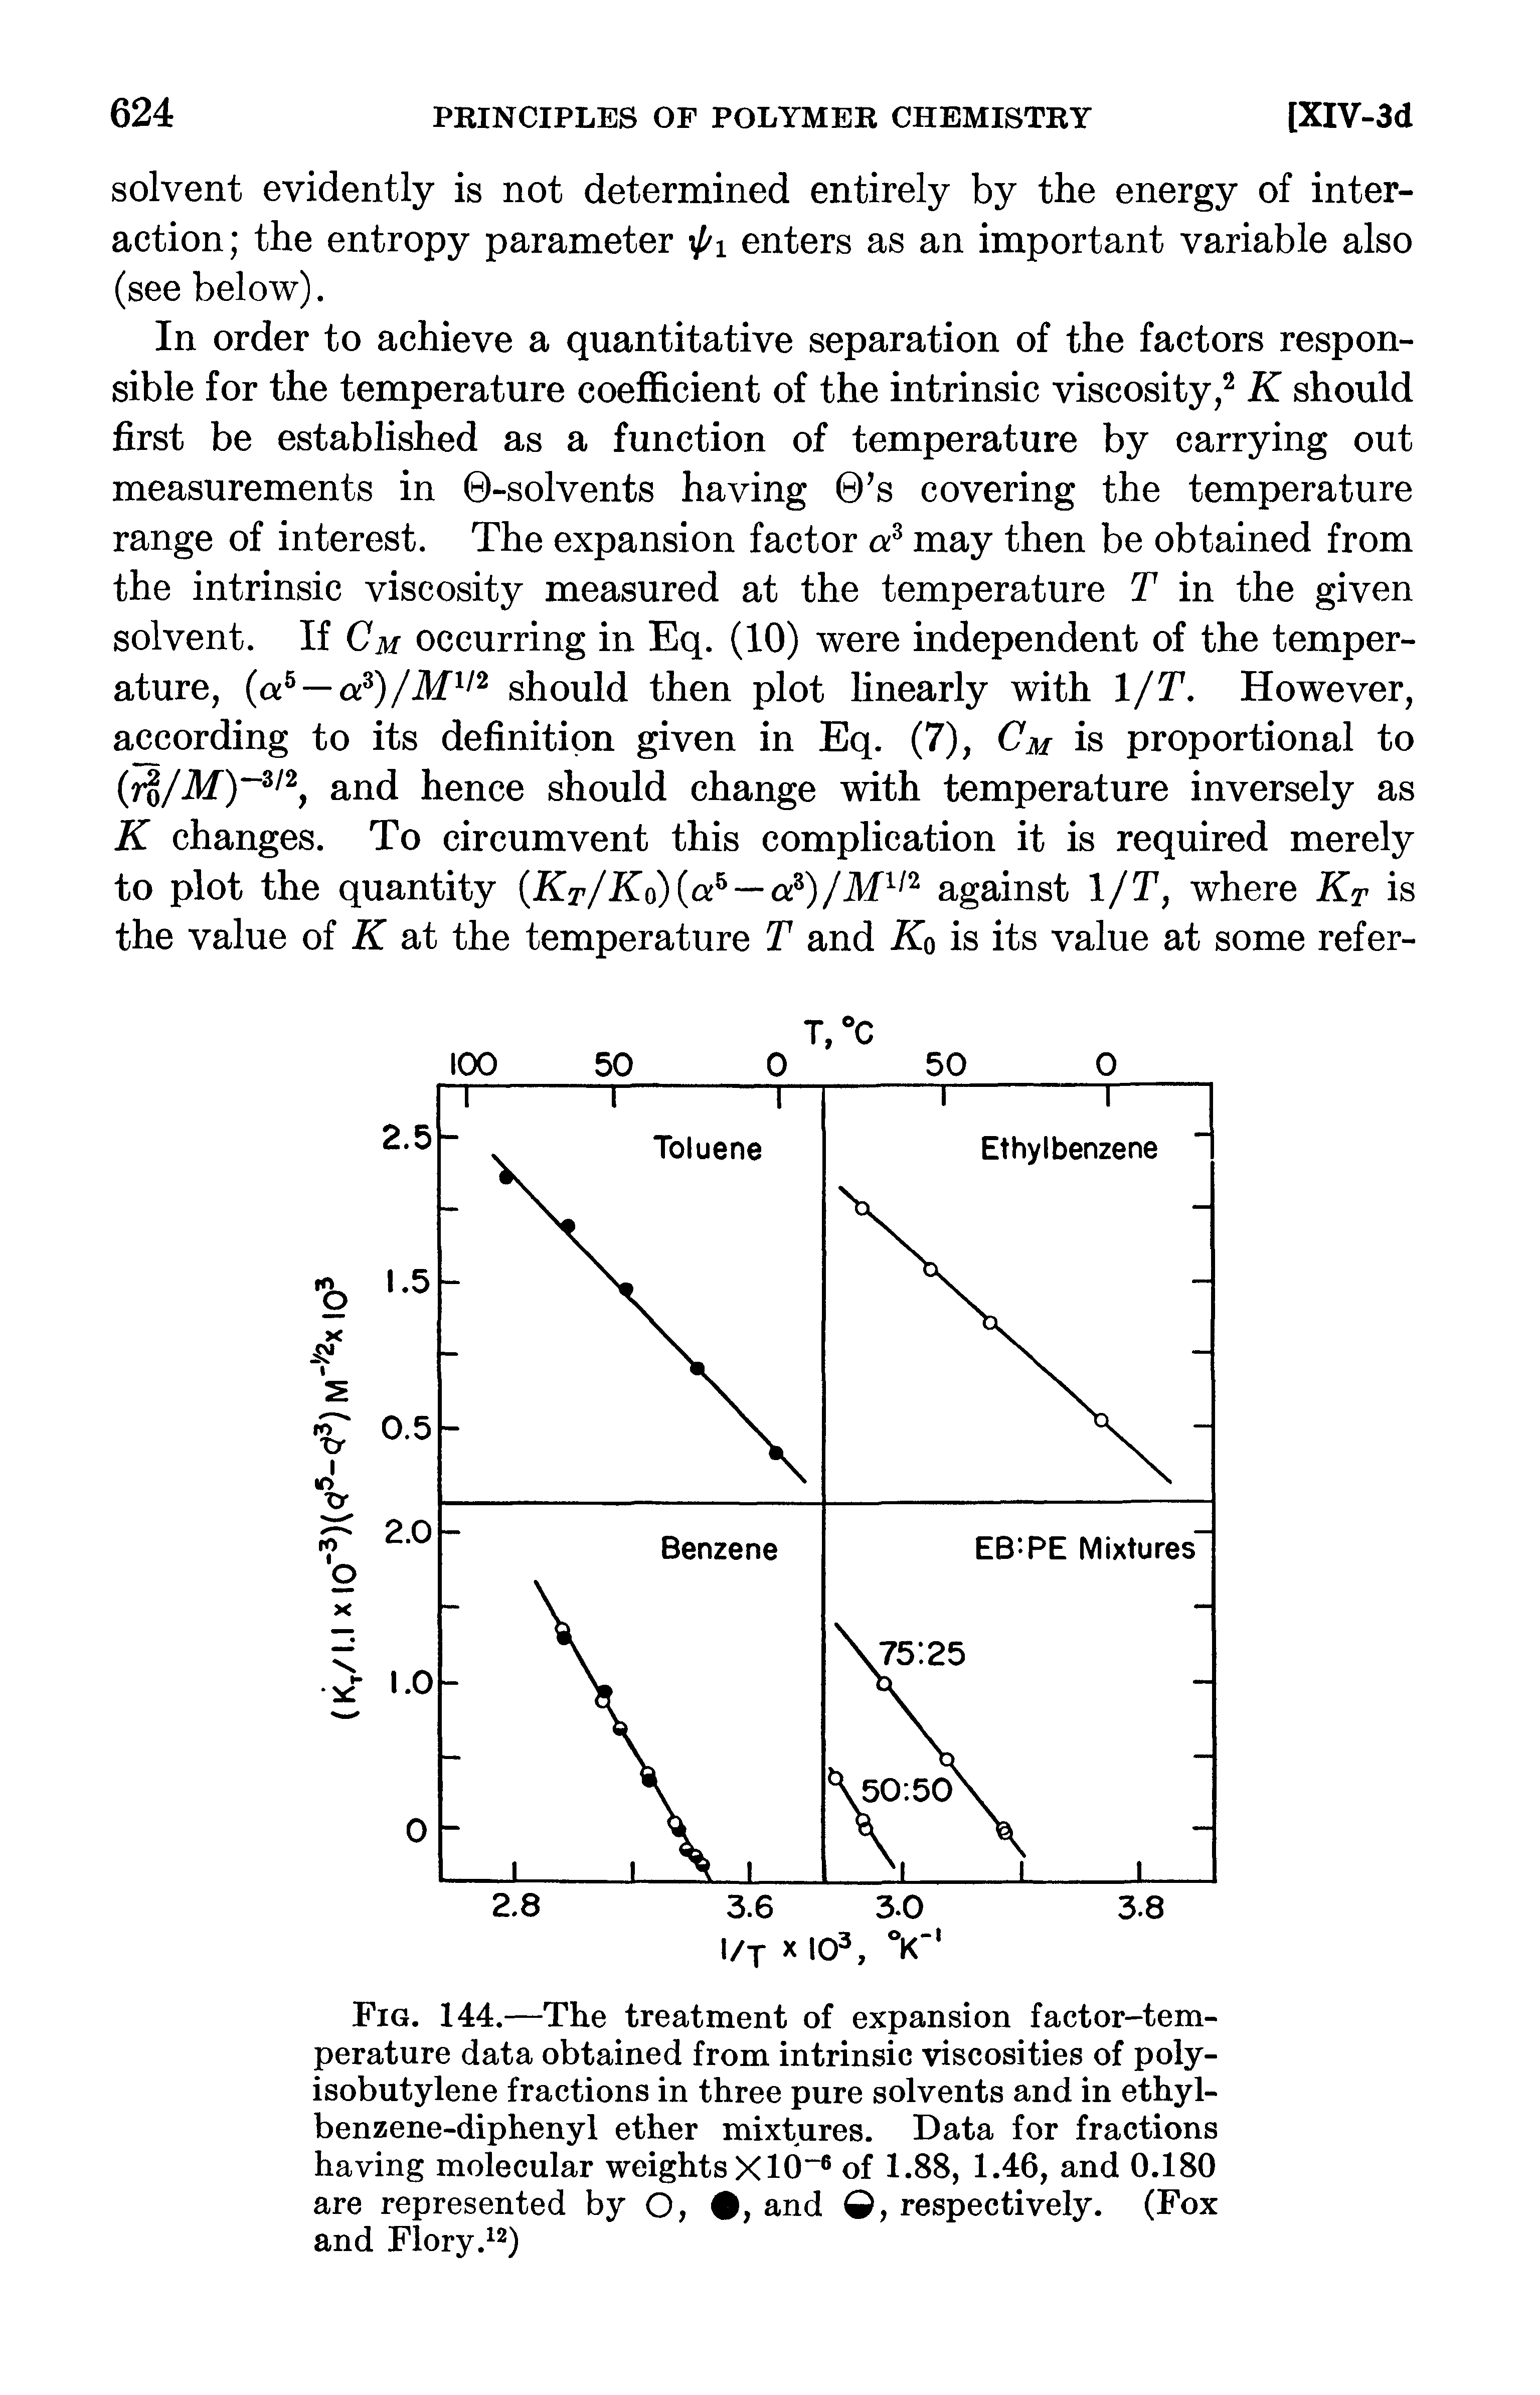 Fig. 144.—The treatment of expansion factor-temperature data obtained from intrinsic viscosities of polyisobutylene fractions in three pure solvents and in ethyl-benzene-diphenyl ether mixtures. Data for fractions having molecular weights Xl6 of 1.88, 1.46, and 0.180 are represented by O,, and Q, respectively. (Fox and Flory. 2)...